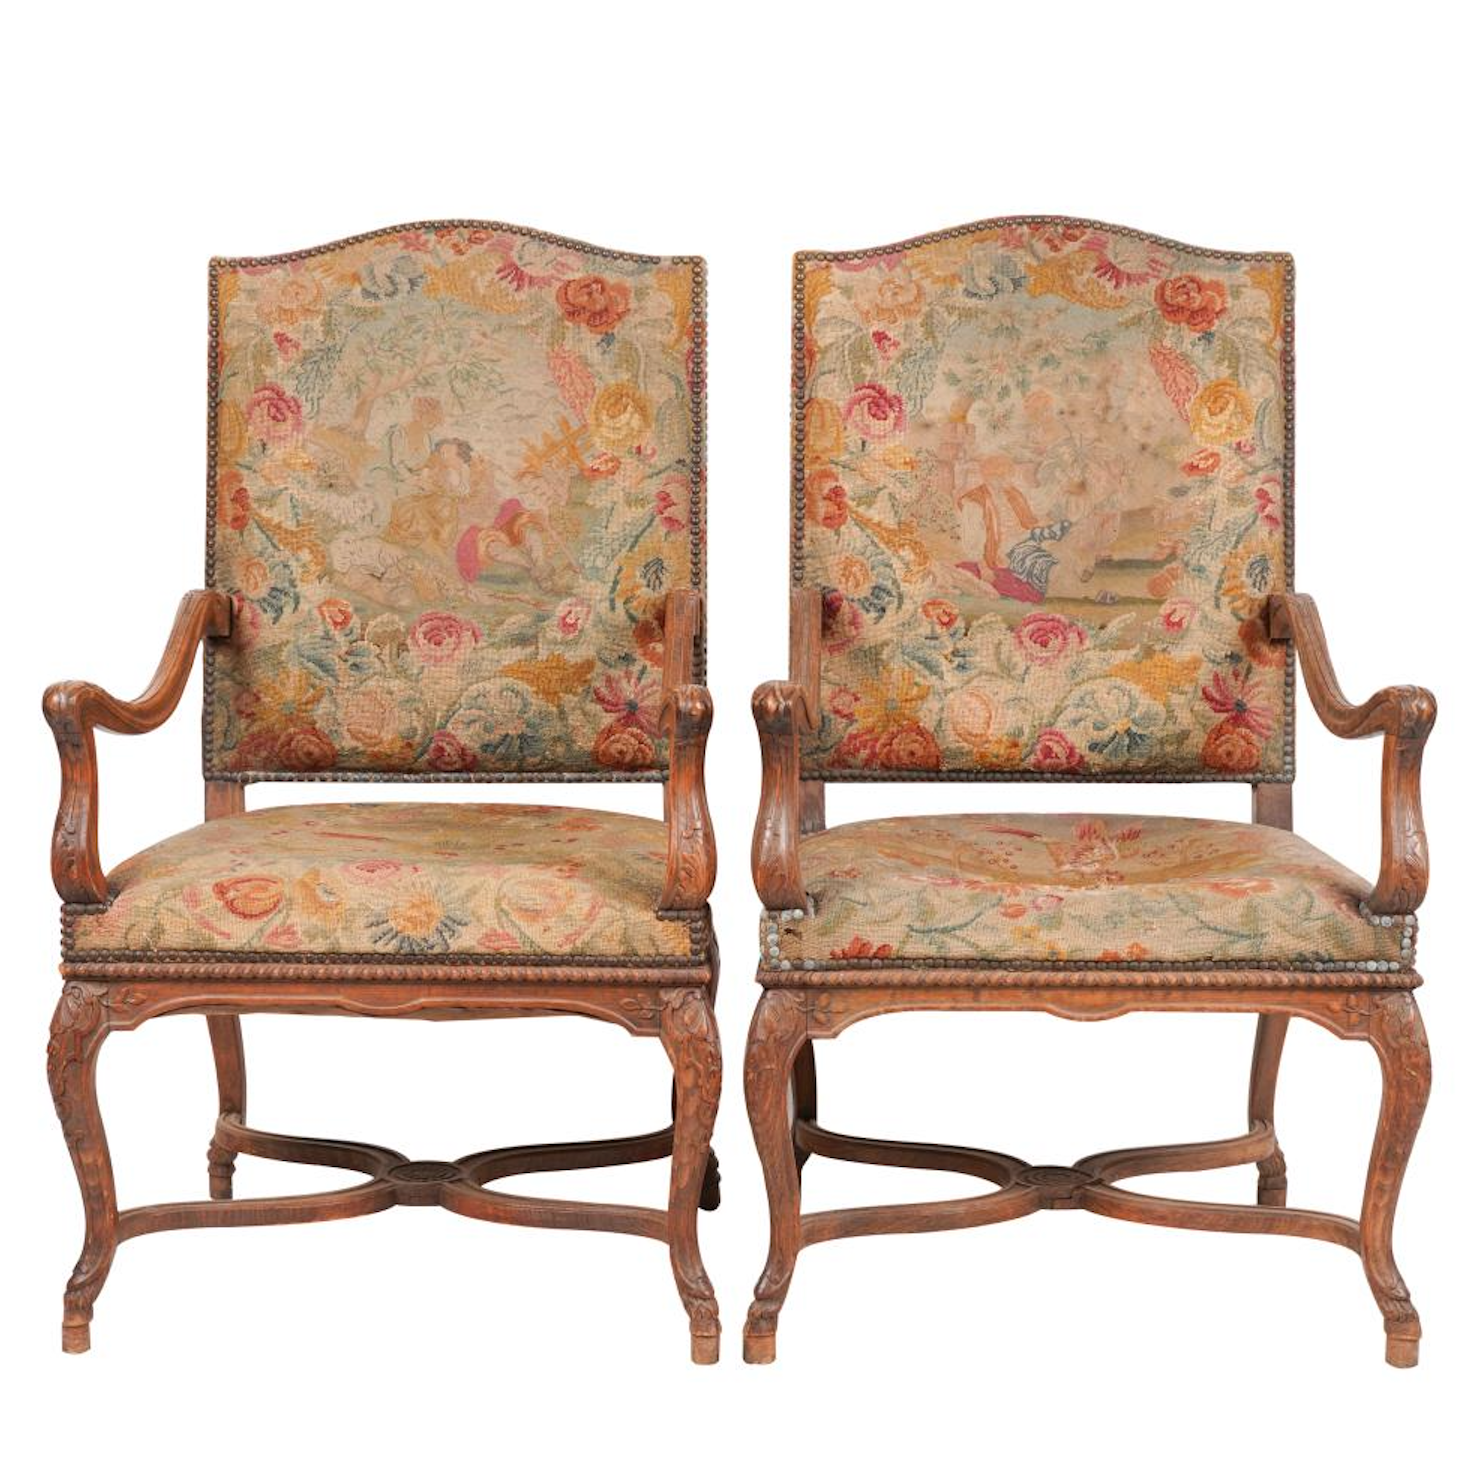 ANTIQUE FRENCH LOUIS XV FAUTEUILS | Work of Man